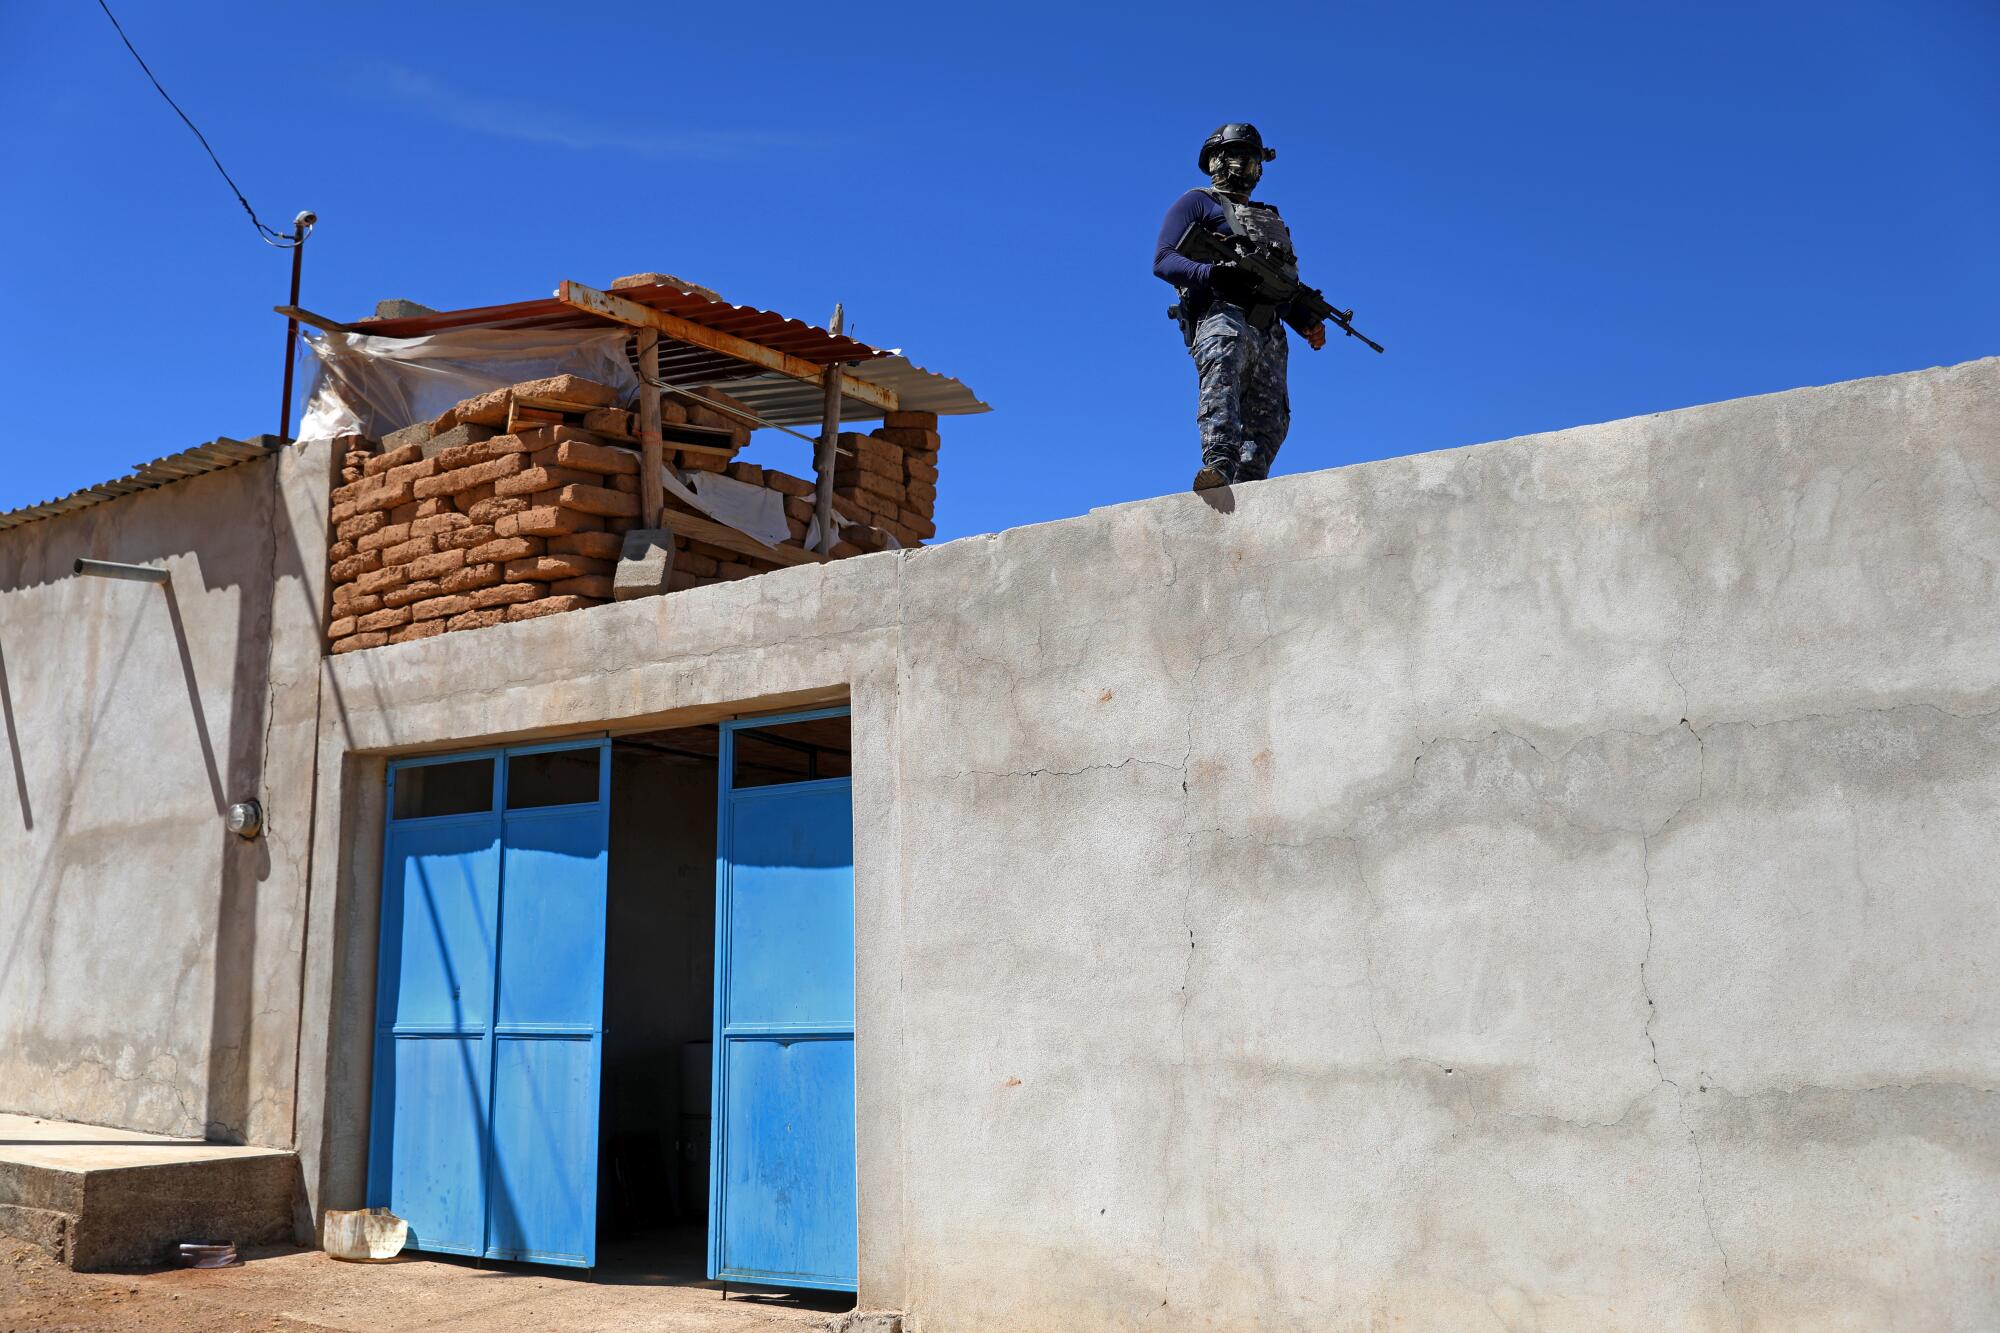 A police officer stands guard at an outpost 